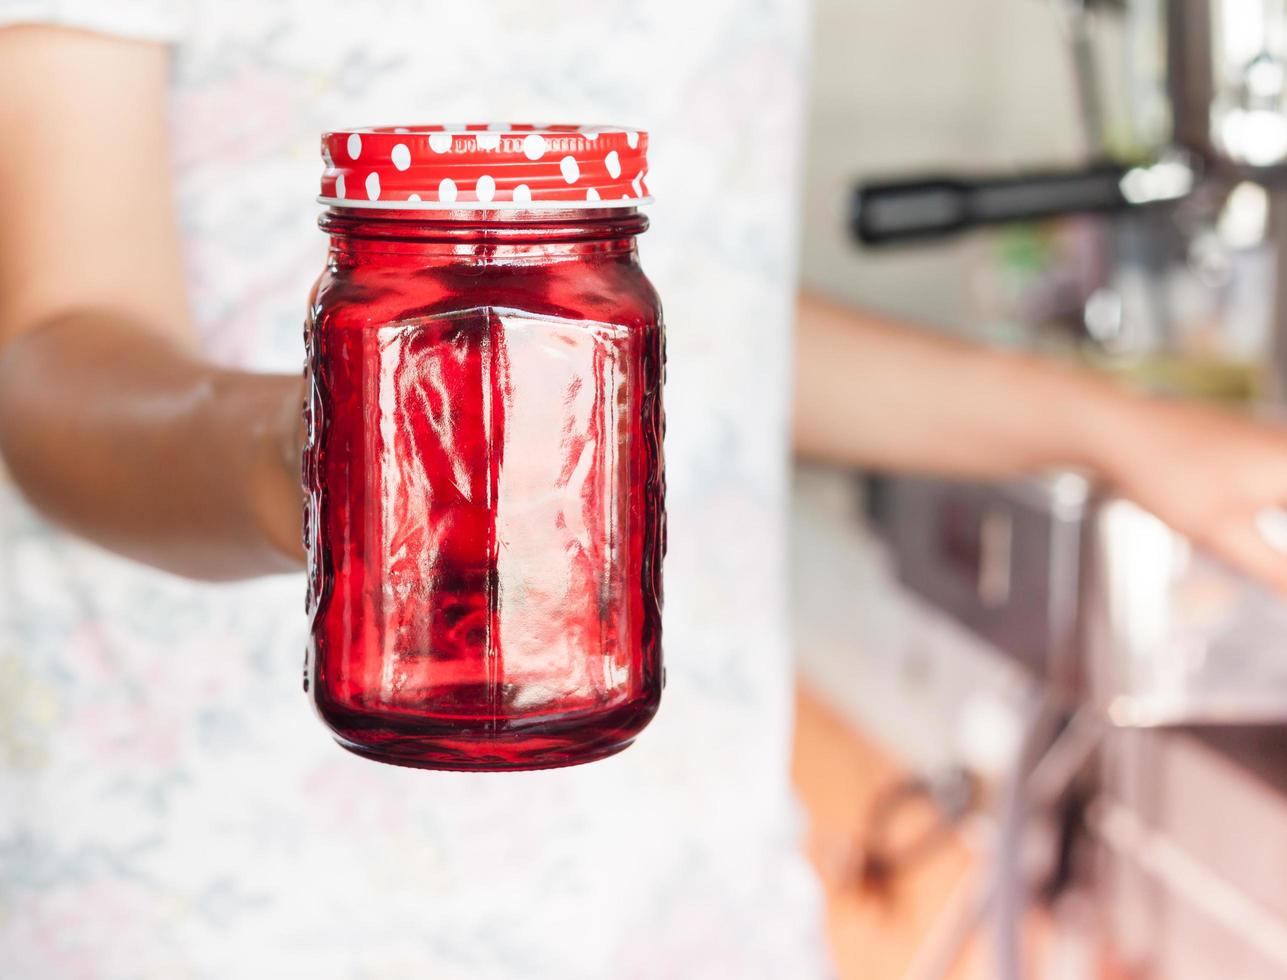 Barista holding a red jar photo